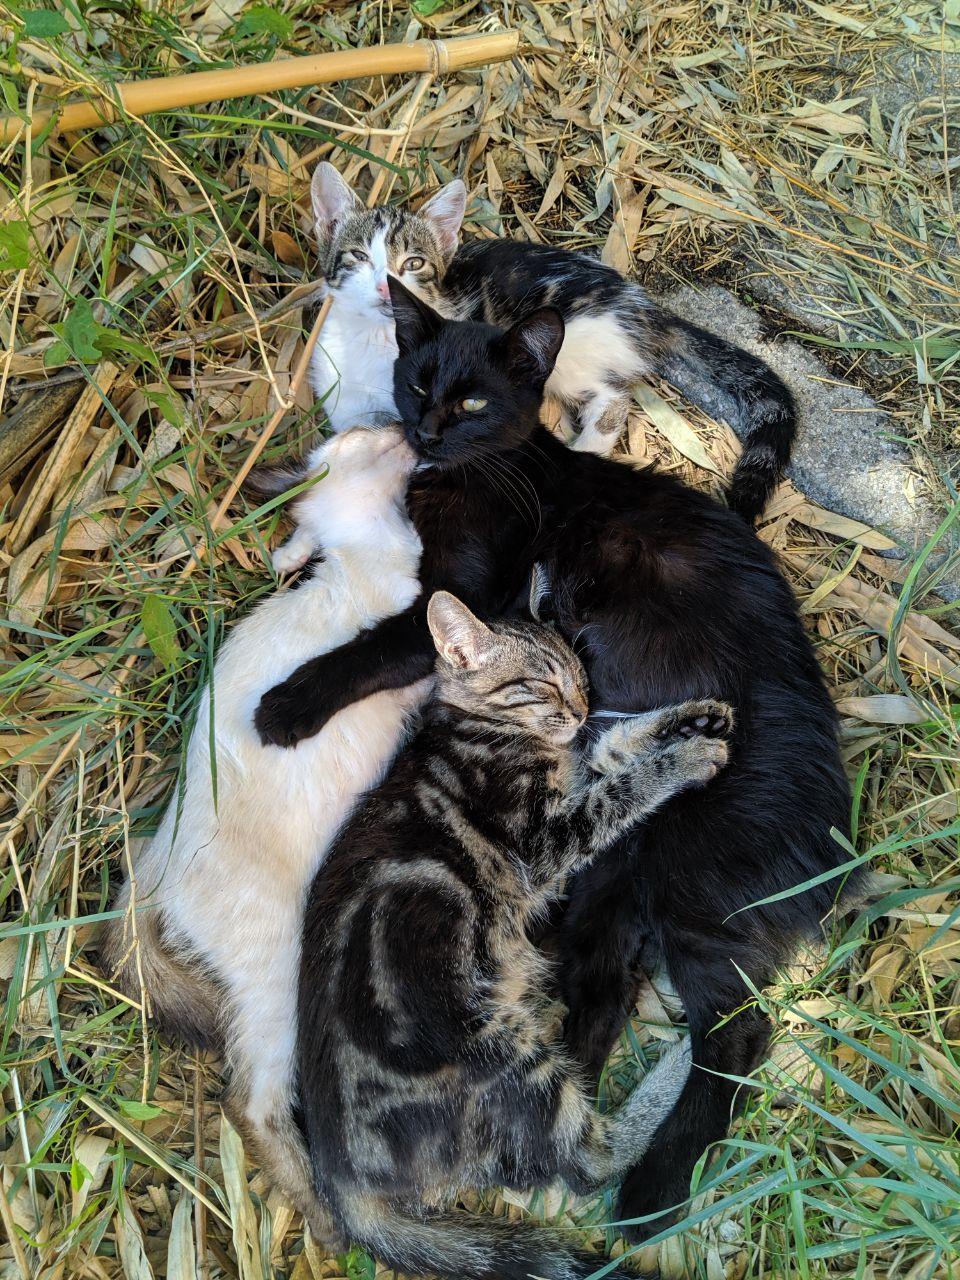 A female cat, Shaniqua, with 3 other female kittens: Mimma, Cappuccina and Camilla